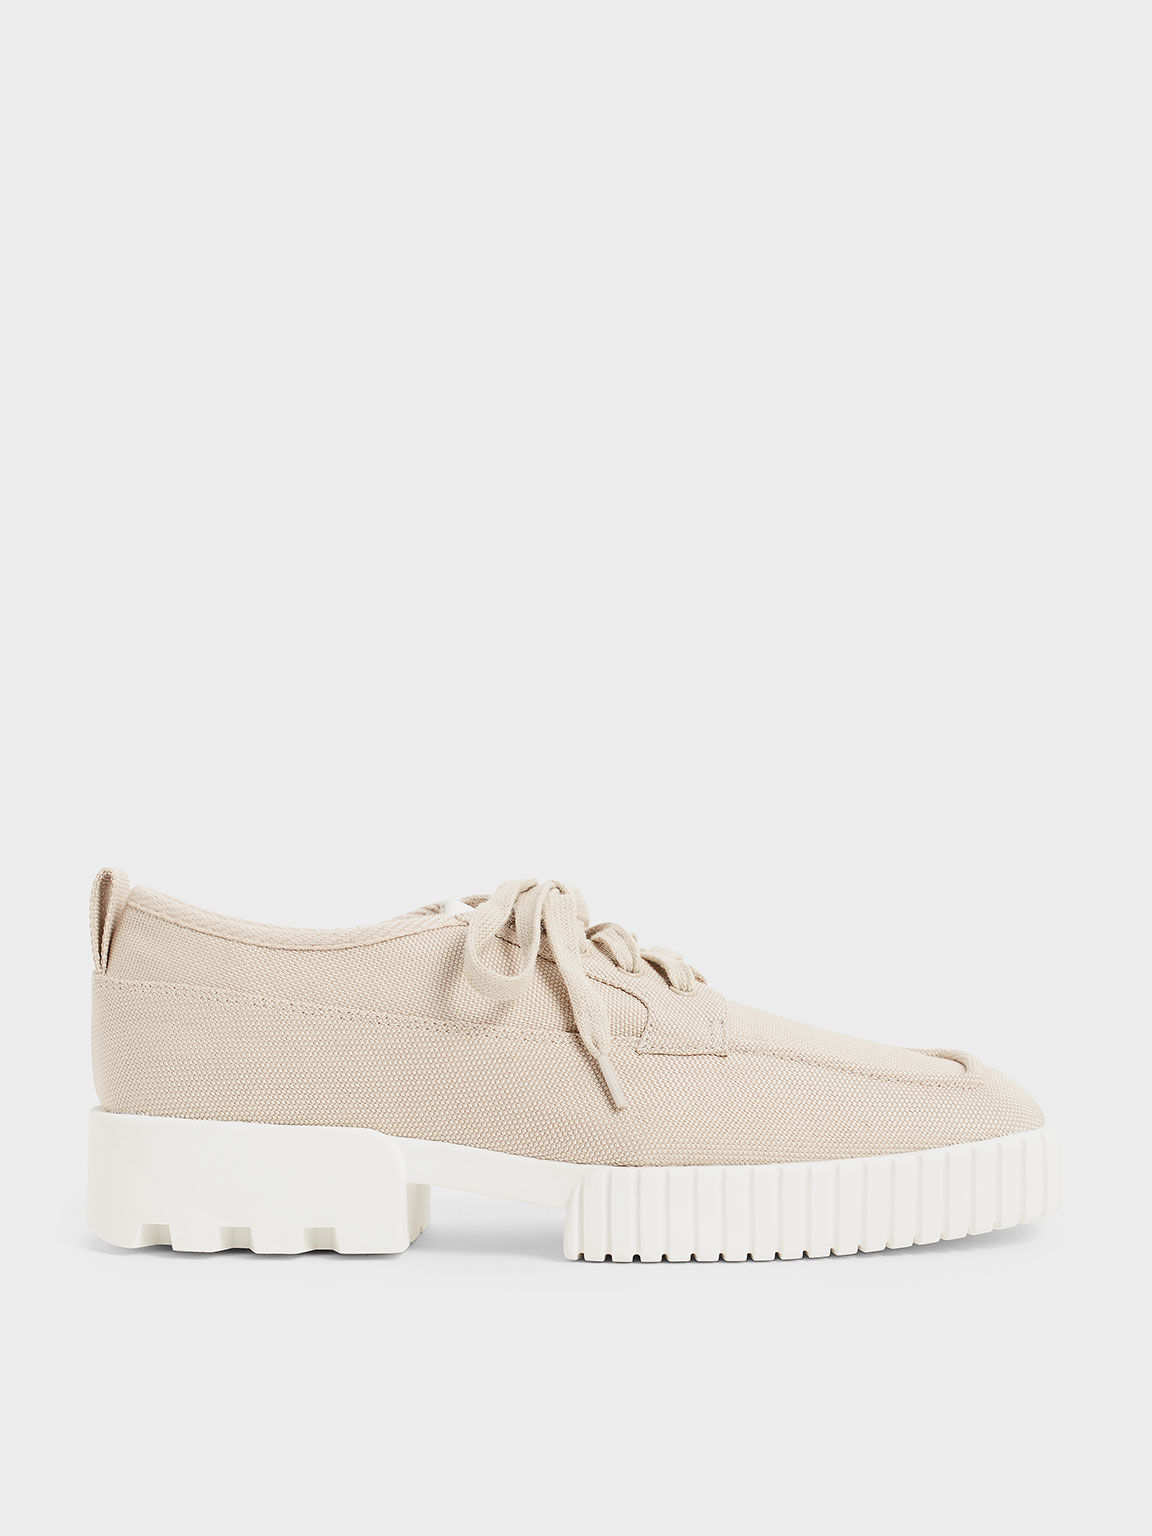 Recycled Polyester Low-Top Sneakers, Beige, hi-res